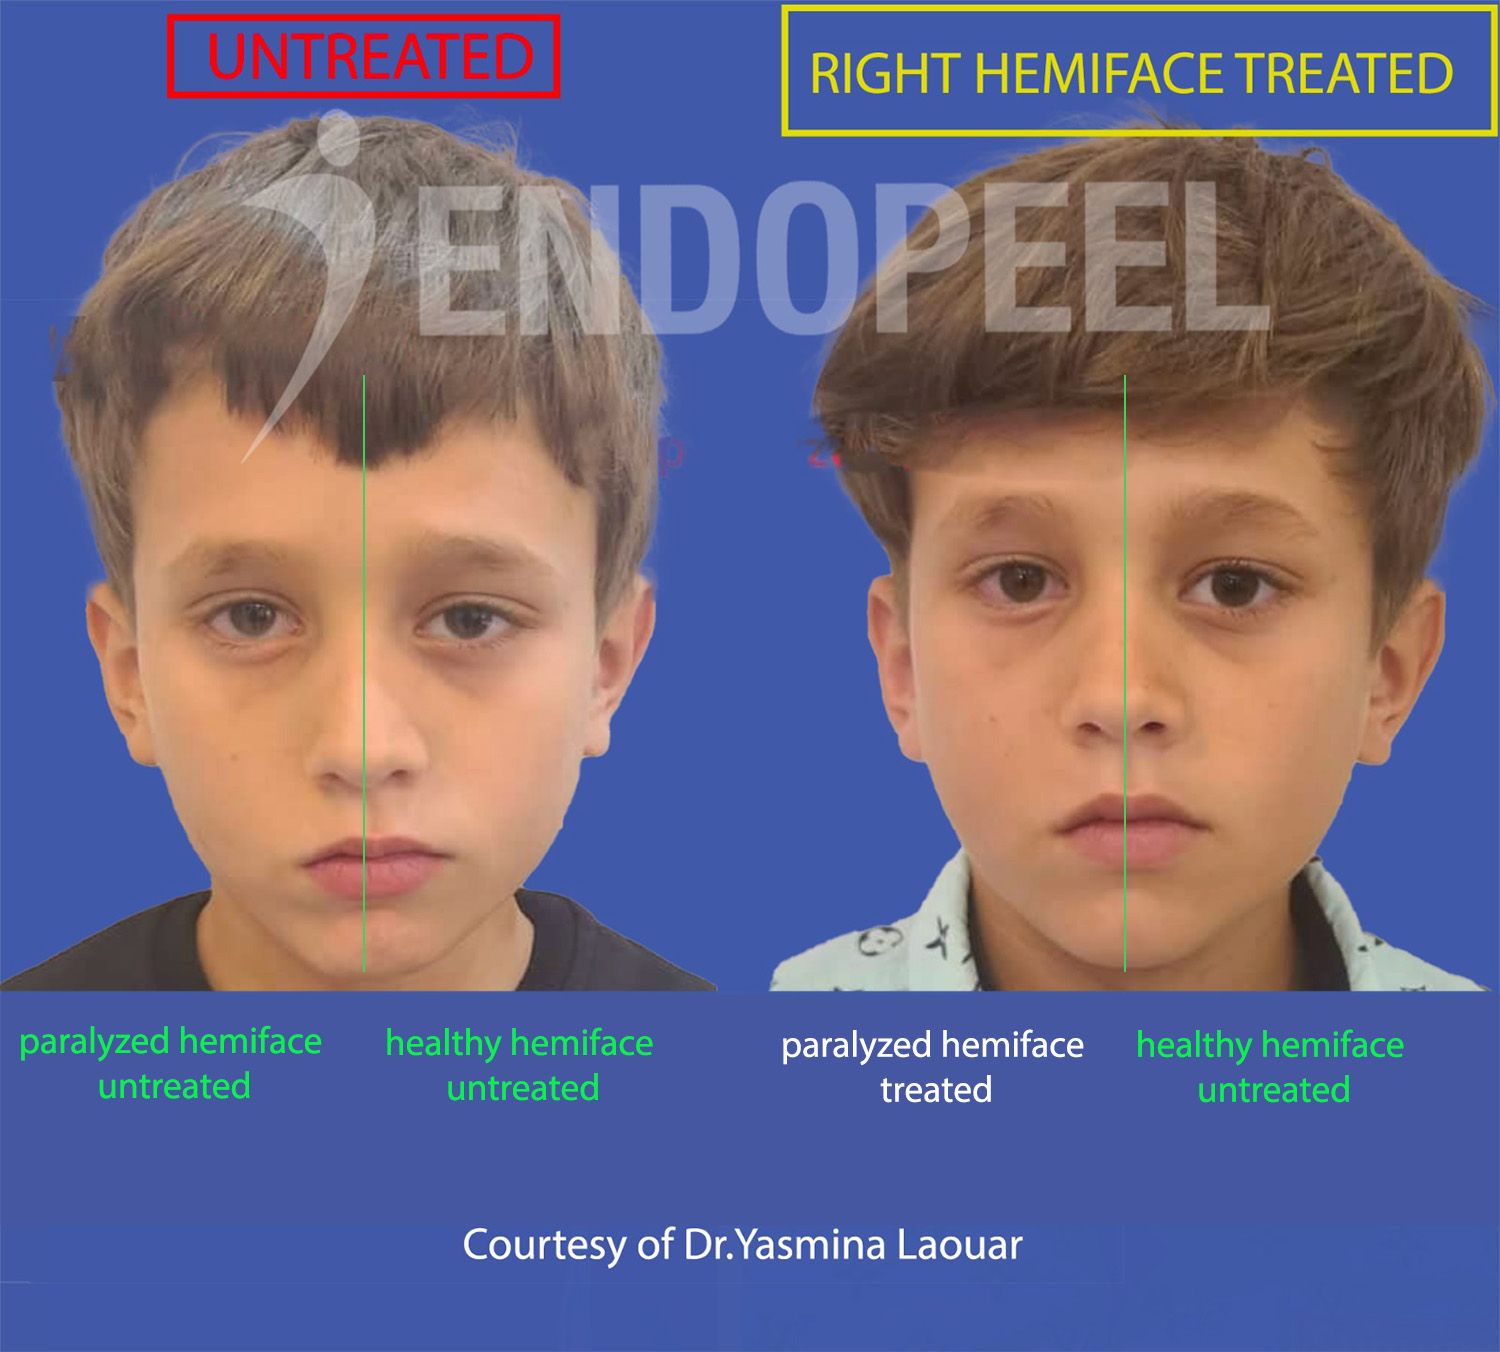 PF-child-endopeel-without-mimicry-nosmile